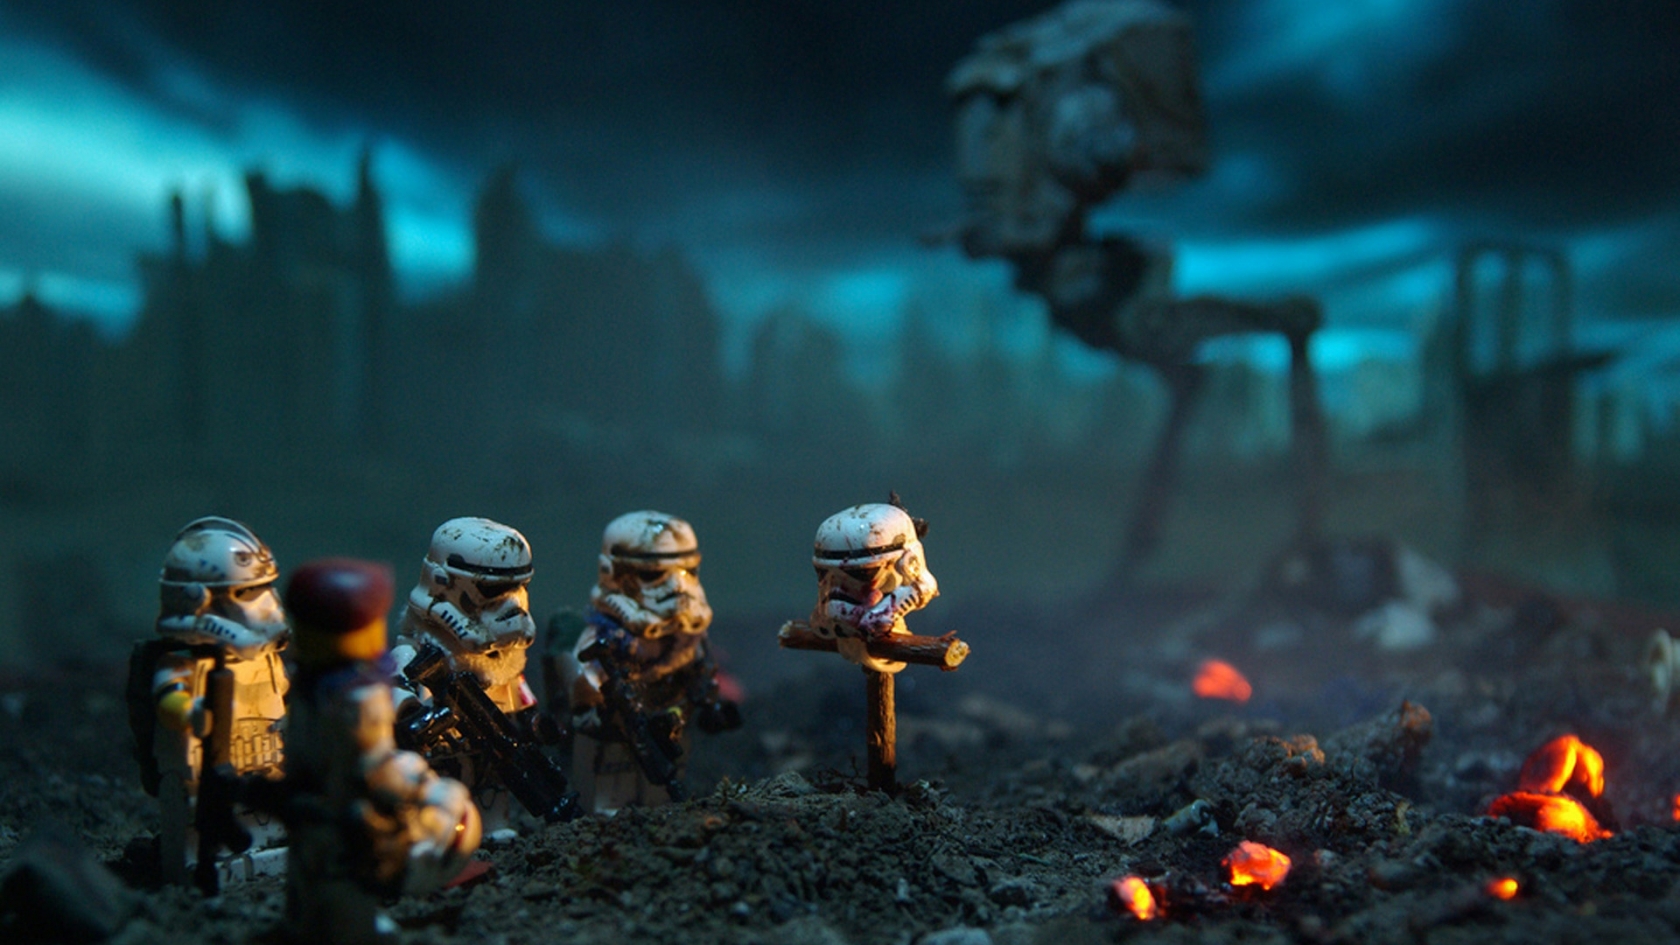 Star Wars Lego Soldiers for 1680 x 945 HDTV resolution